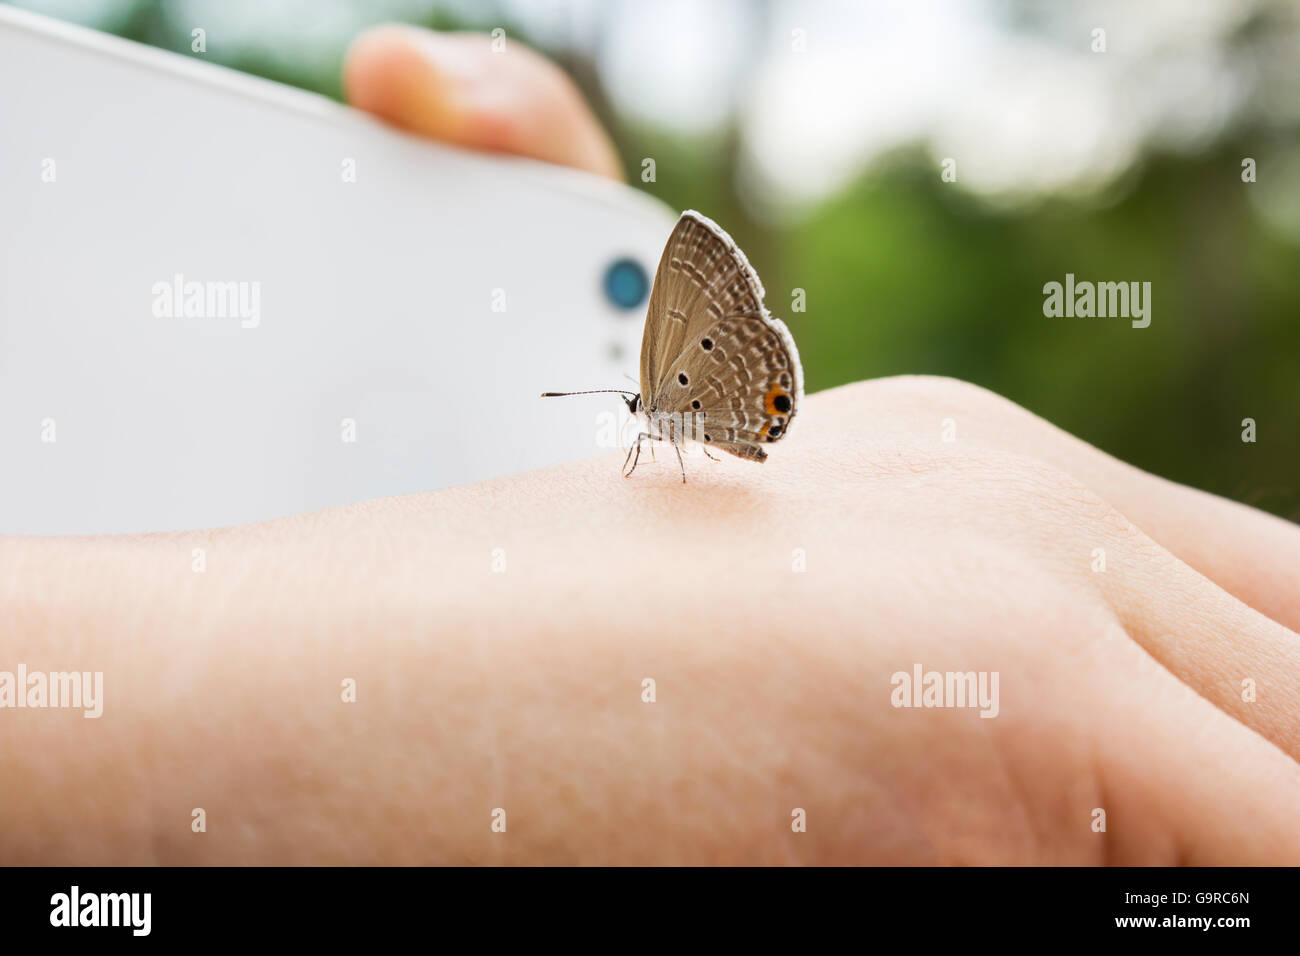 Lovely butterfly suddenly catch hand with blurred smartphone and finger shooting photo at background, harmony nature creature wi Stock Photo